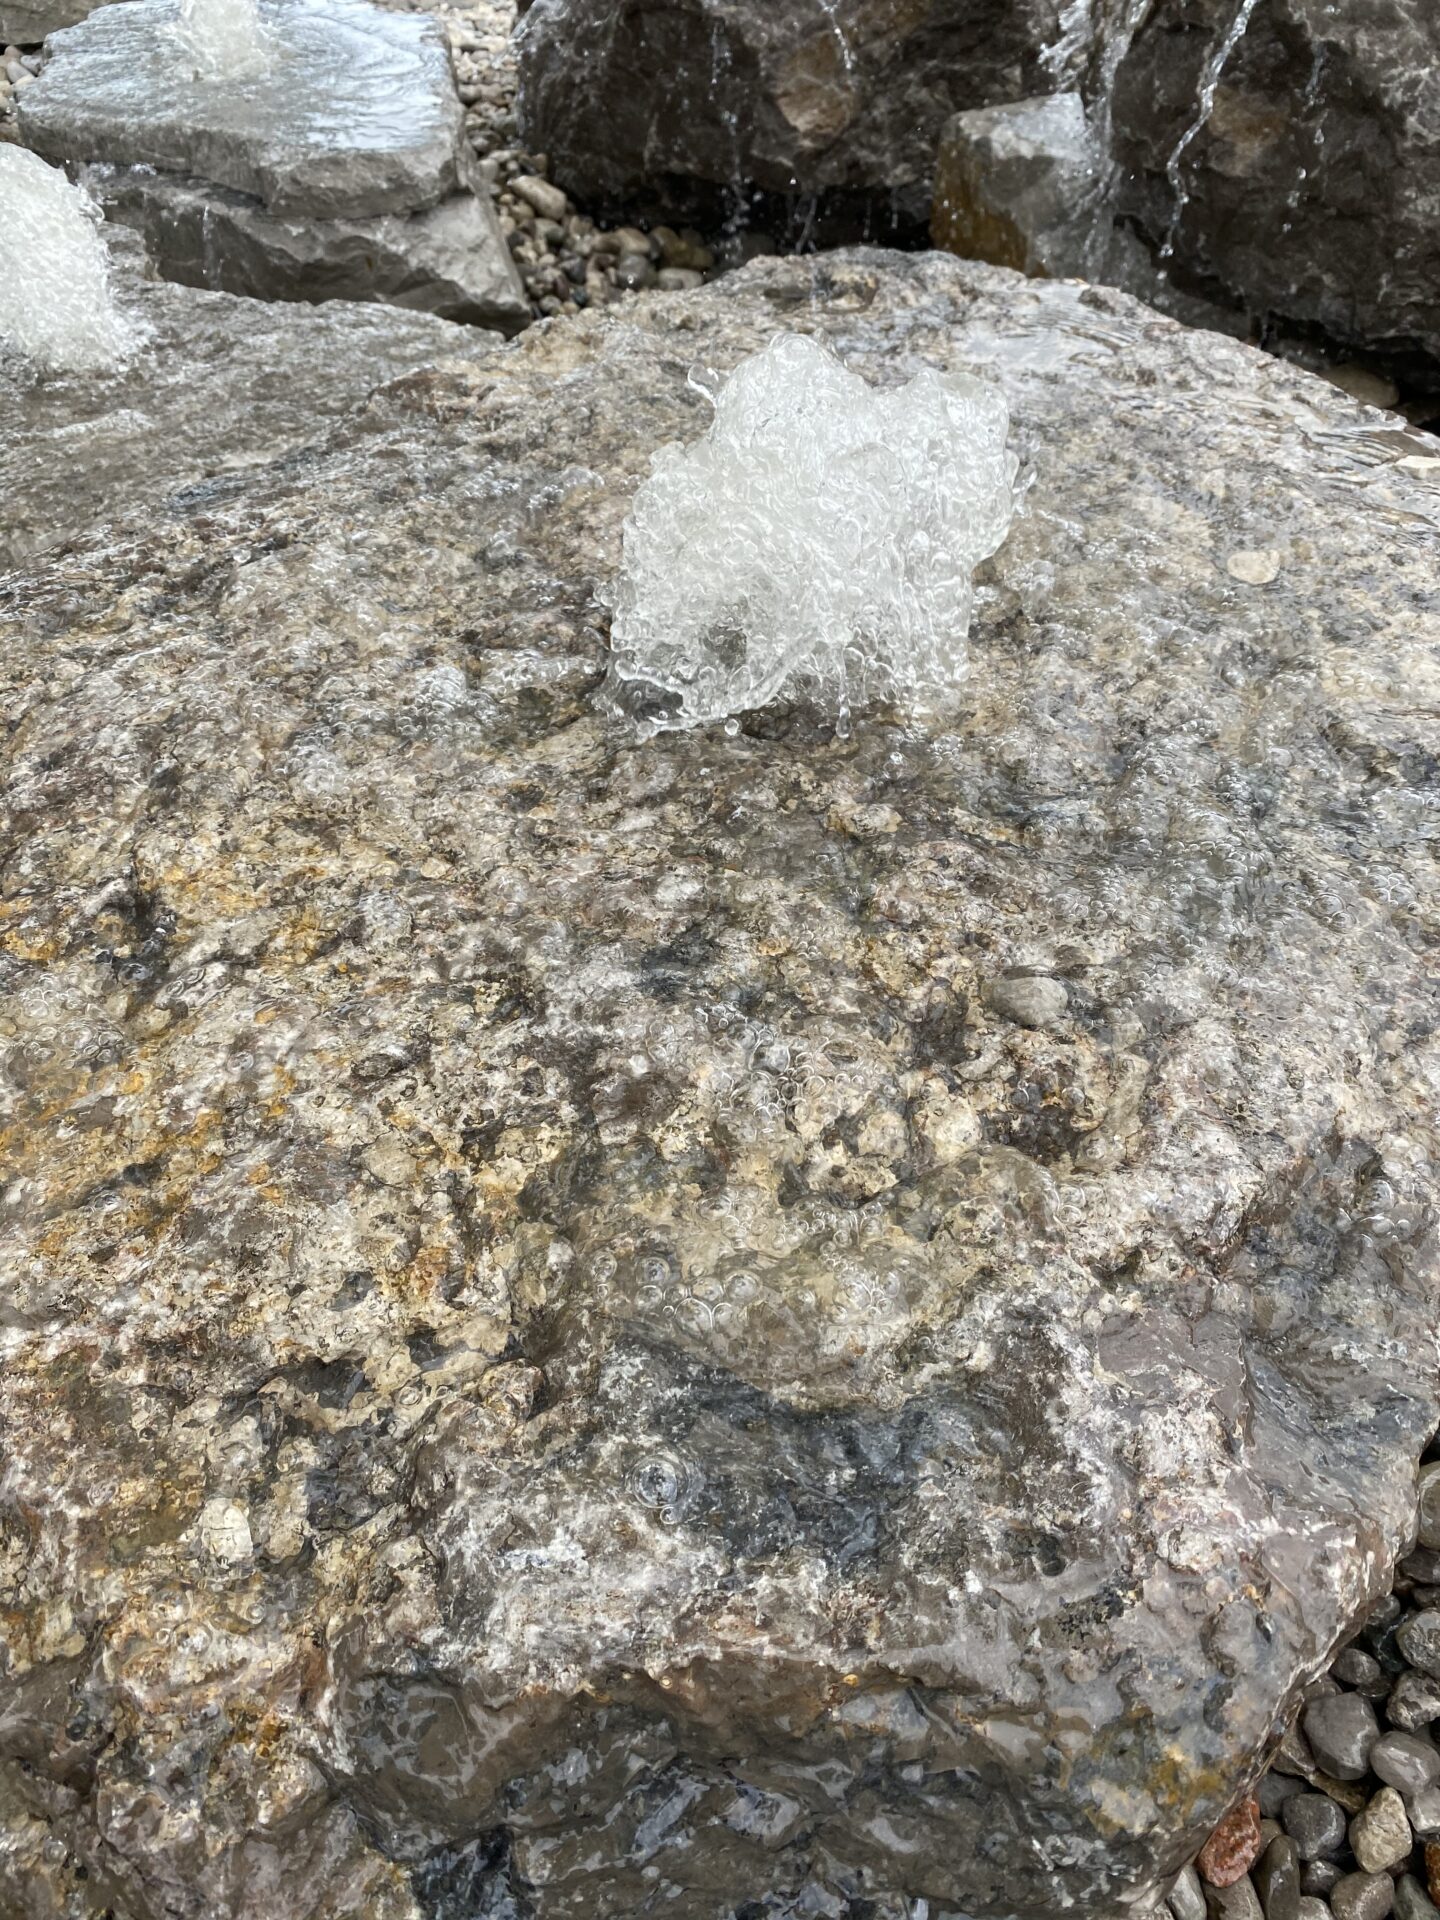 The image shows water bubbling over a large rock, possibly in a stream or fountain, with additional rocks and flowing water visible in the background.